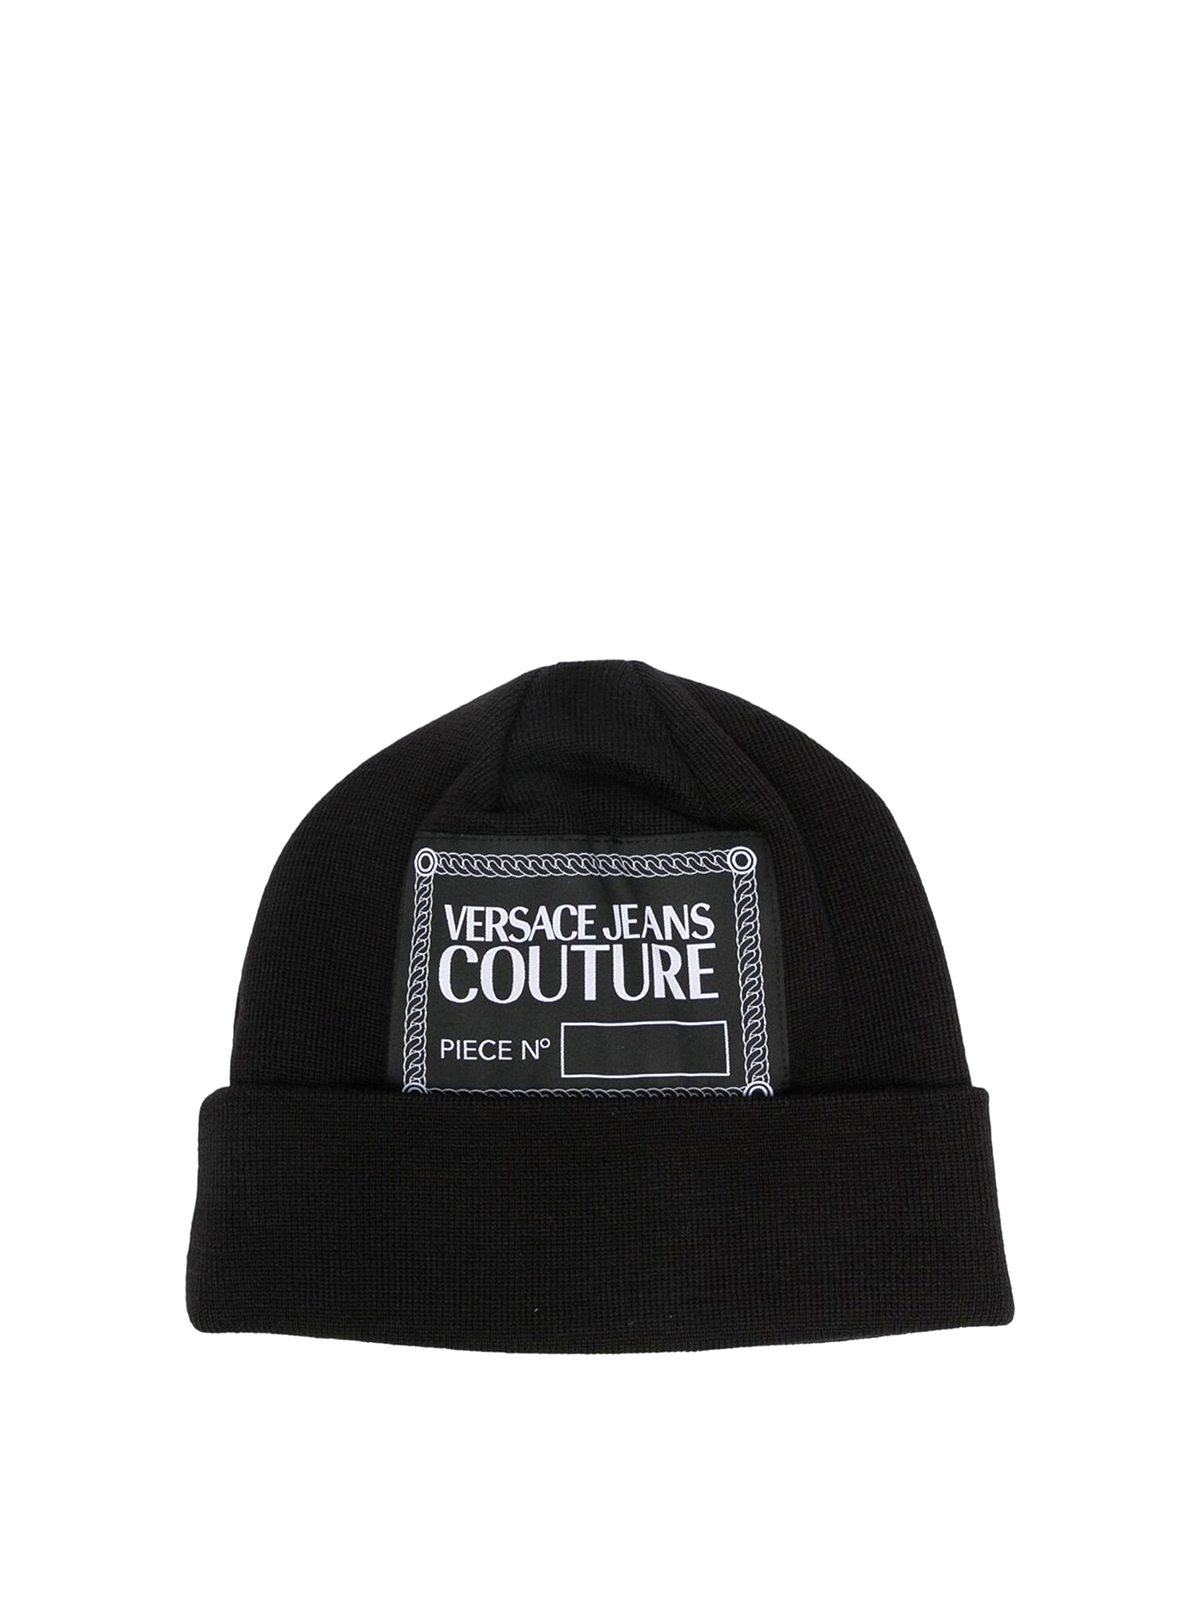 Shop Versace Jeans Couture Sombrero - Piece Number In Black